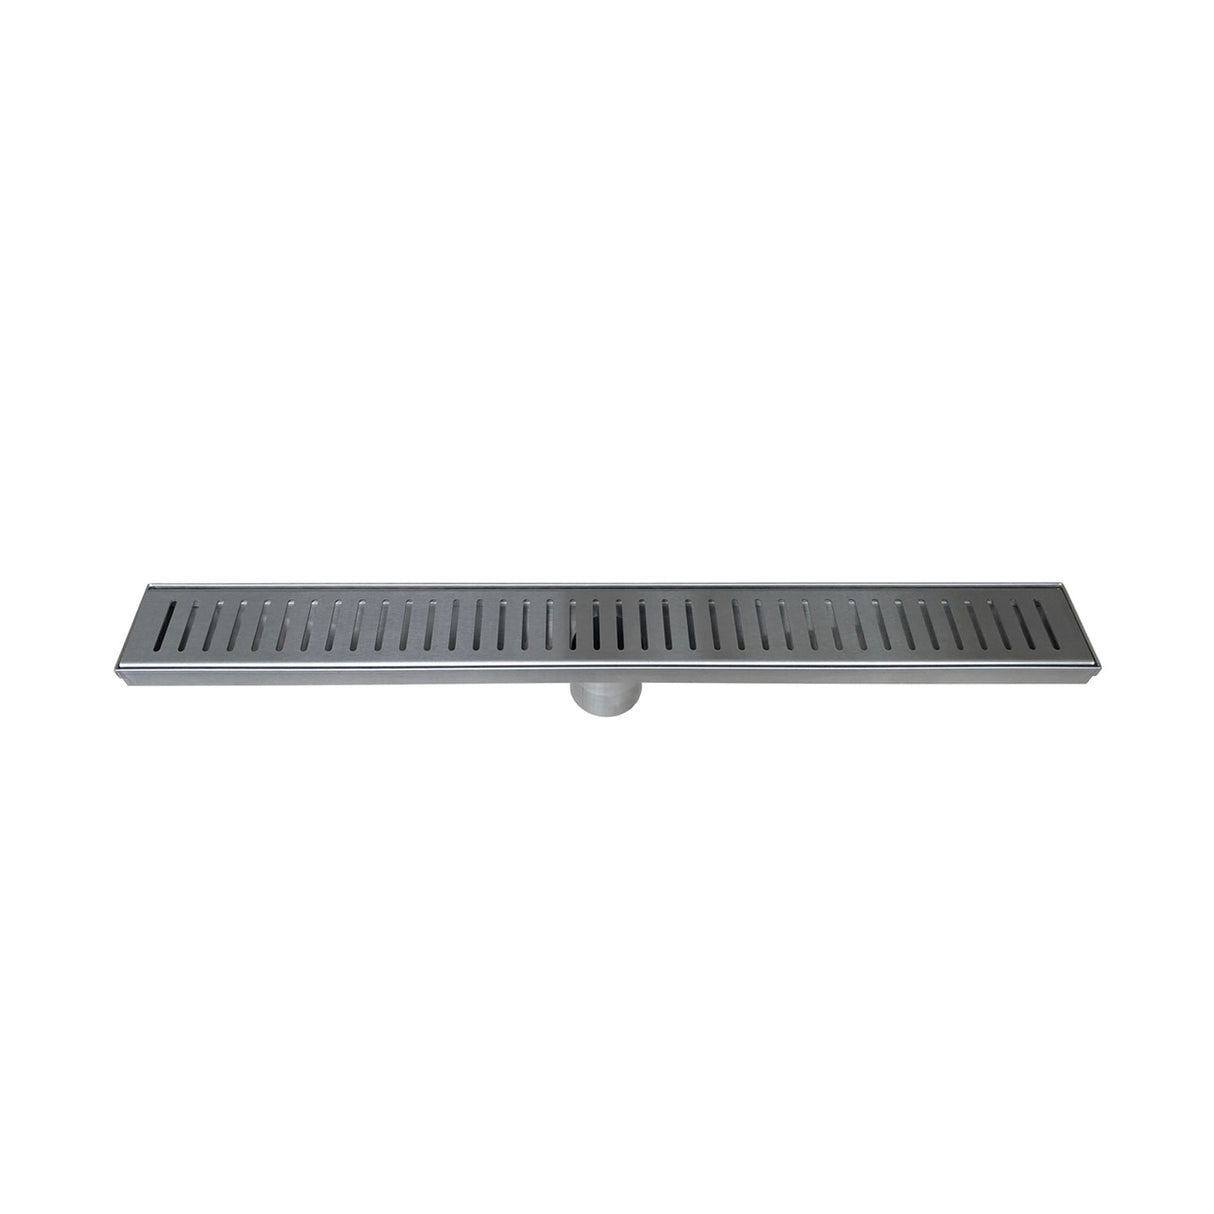 DAX Stainless Steel Rectangular Shower Floor Drain with 18 Gauge, 48", Polished DR48-G06